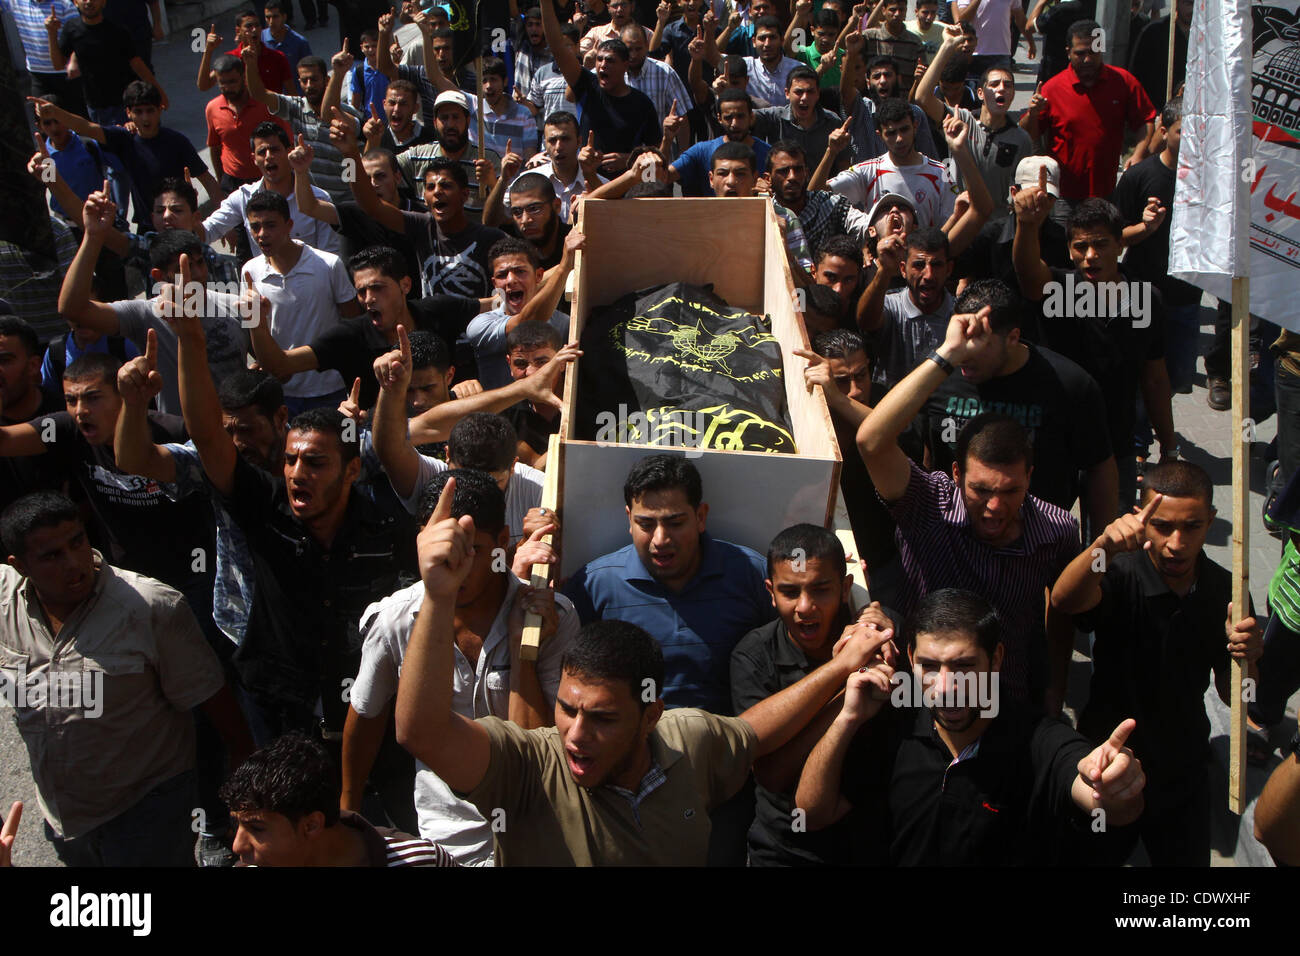 Palestinian mourners carry the body of Remah al-Hasani, a member of its military wing, the Al-Quds Brigades, during his funeral in Gaza city on Sep. 8, 2011. He was killed as he was driving in the central Deir al-Balah district of the territory, medics said. Photo by Ashraf Amra Stock Photo